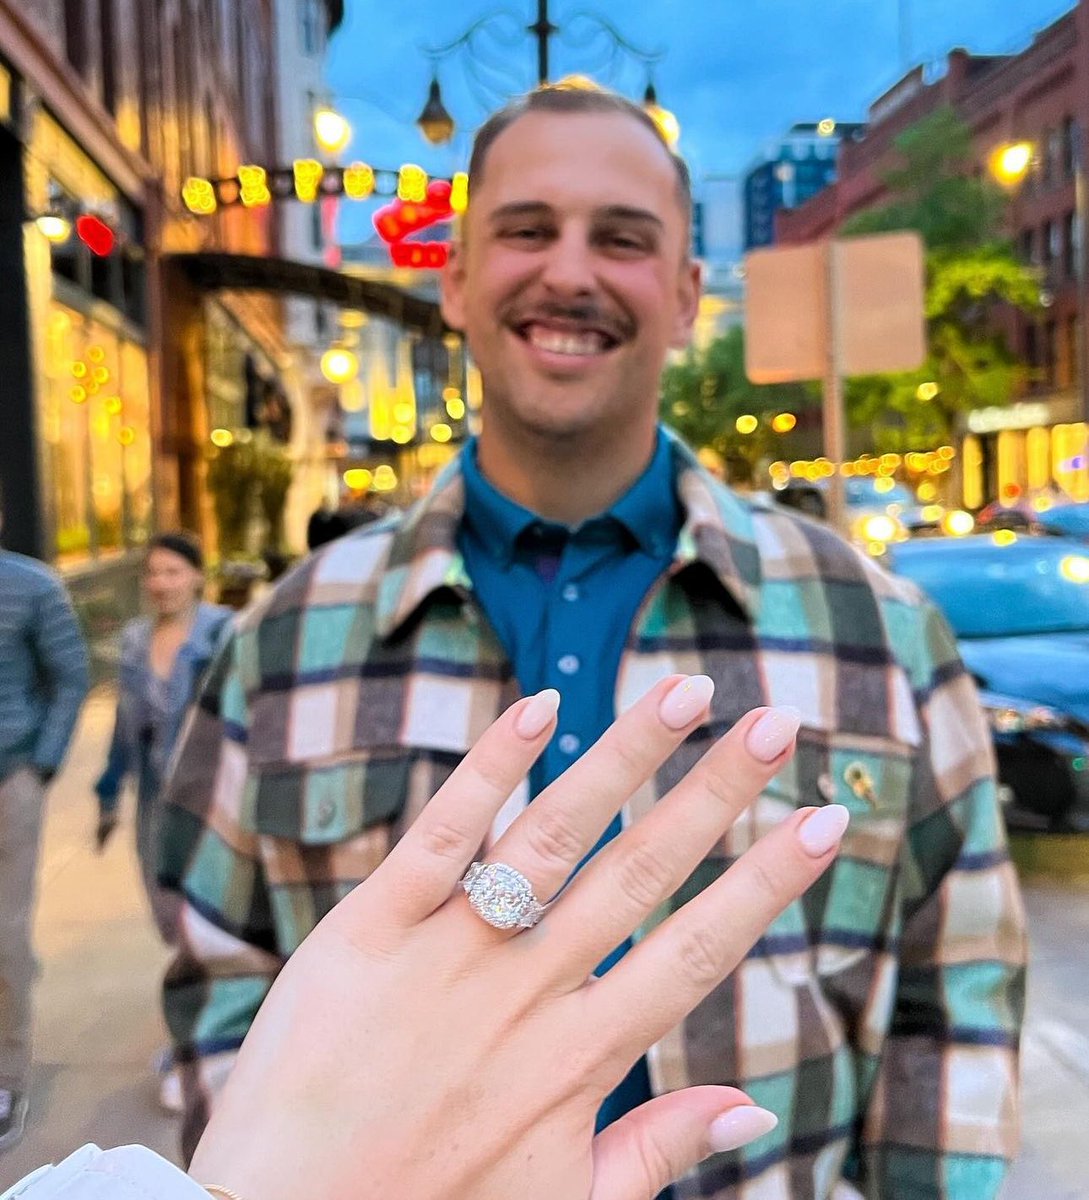 Nathaniel Lowe is engaged! 💍 In the midst of a really trying time for his family he’s been positive, joyful and always had a smile on his face. Happy for such an exciting season to begin. Congrats to the future Lowe’s! #StraightUpTX